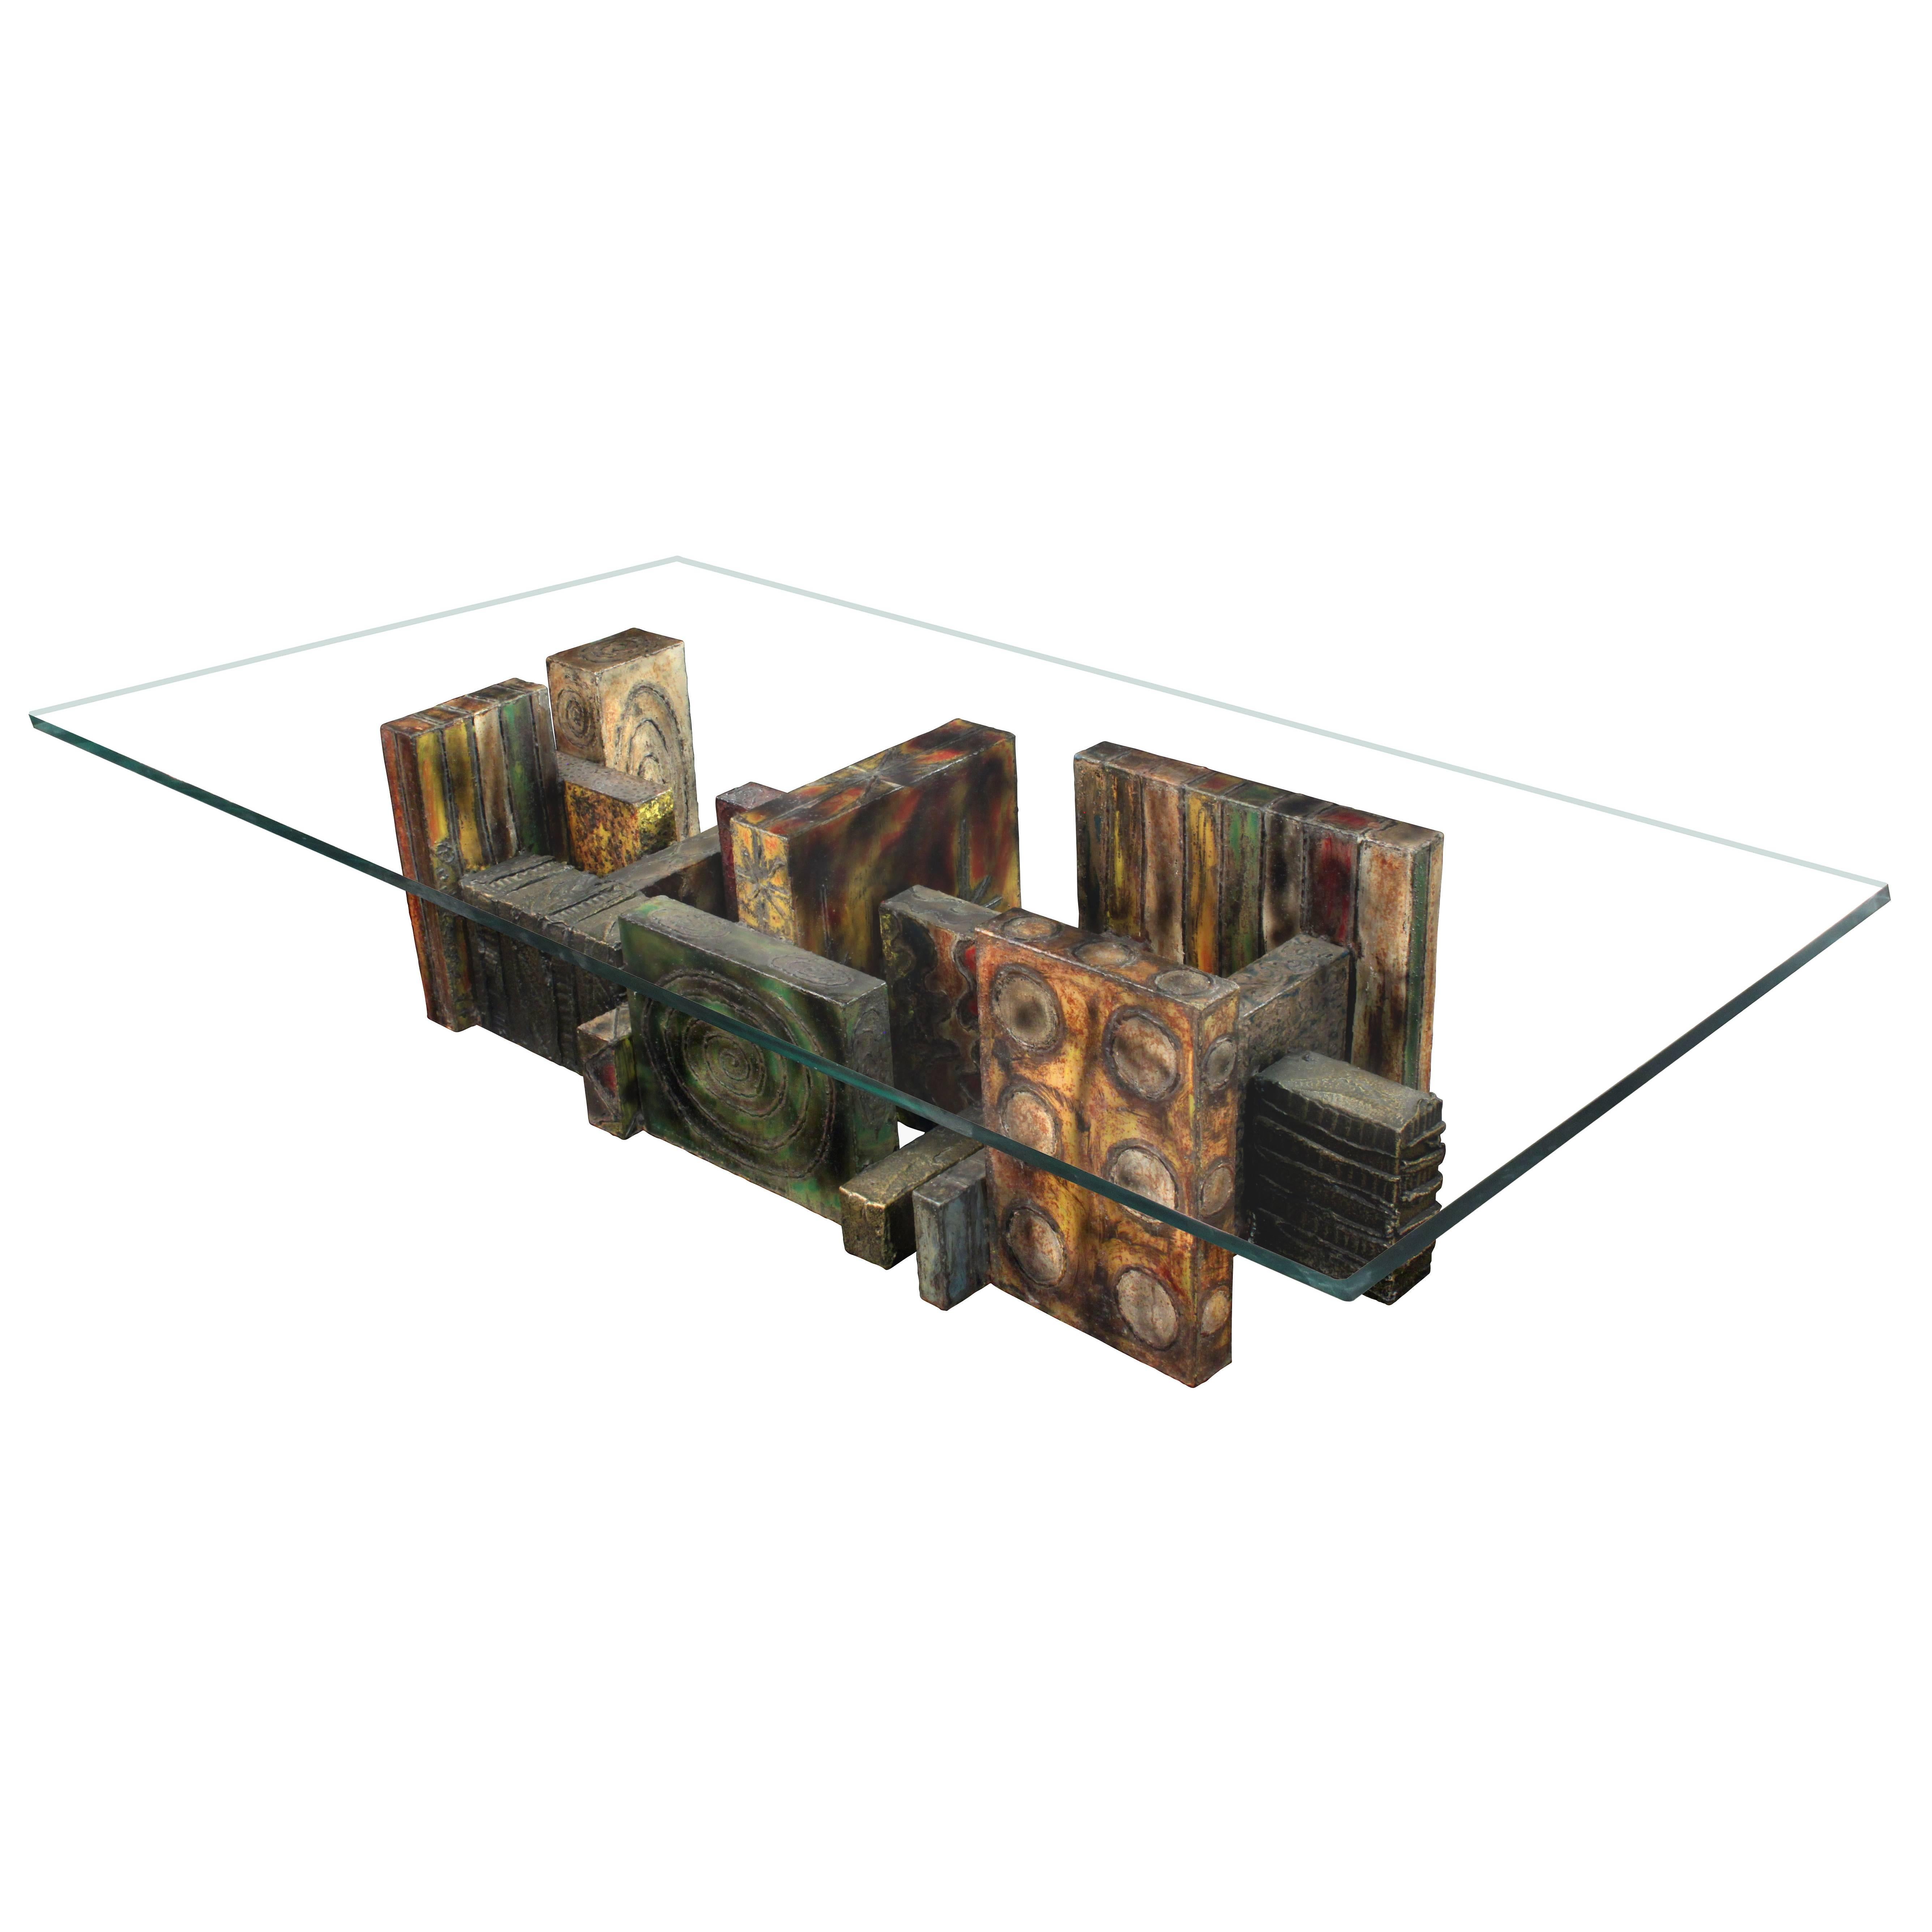 Rare and Exceptional Large Studio Coffee Table by Paul Evans